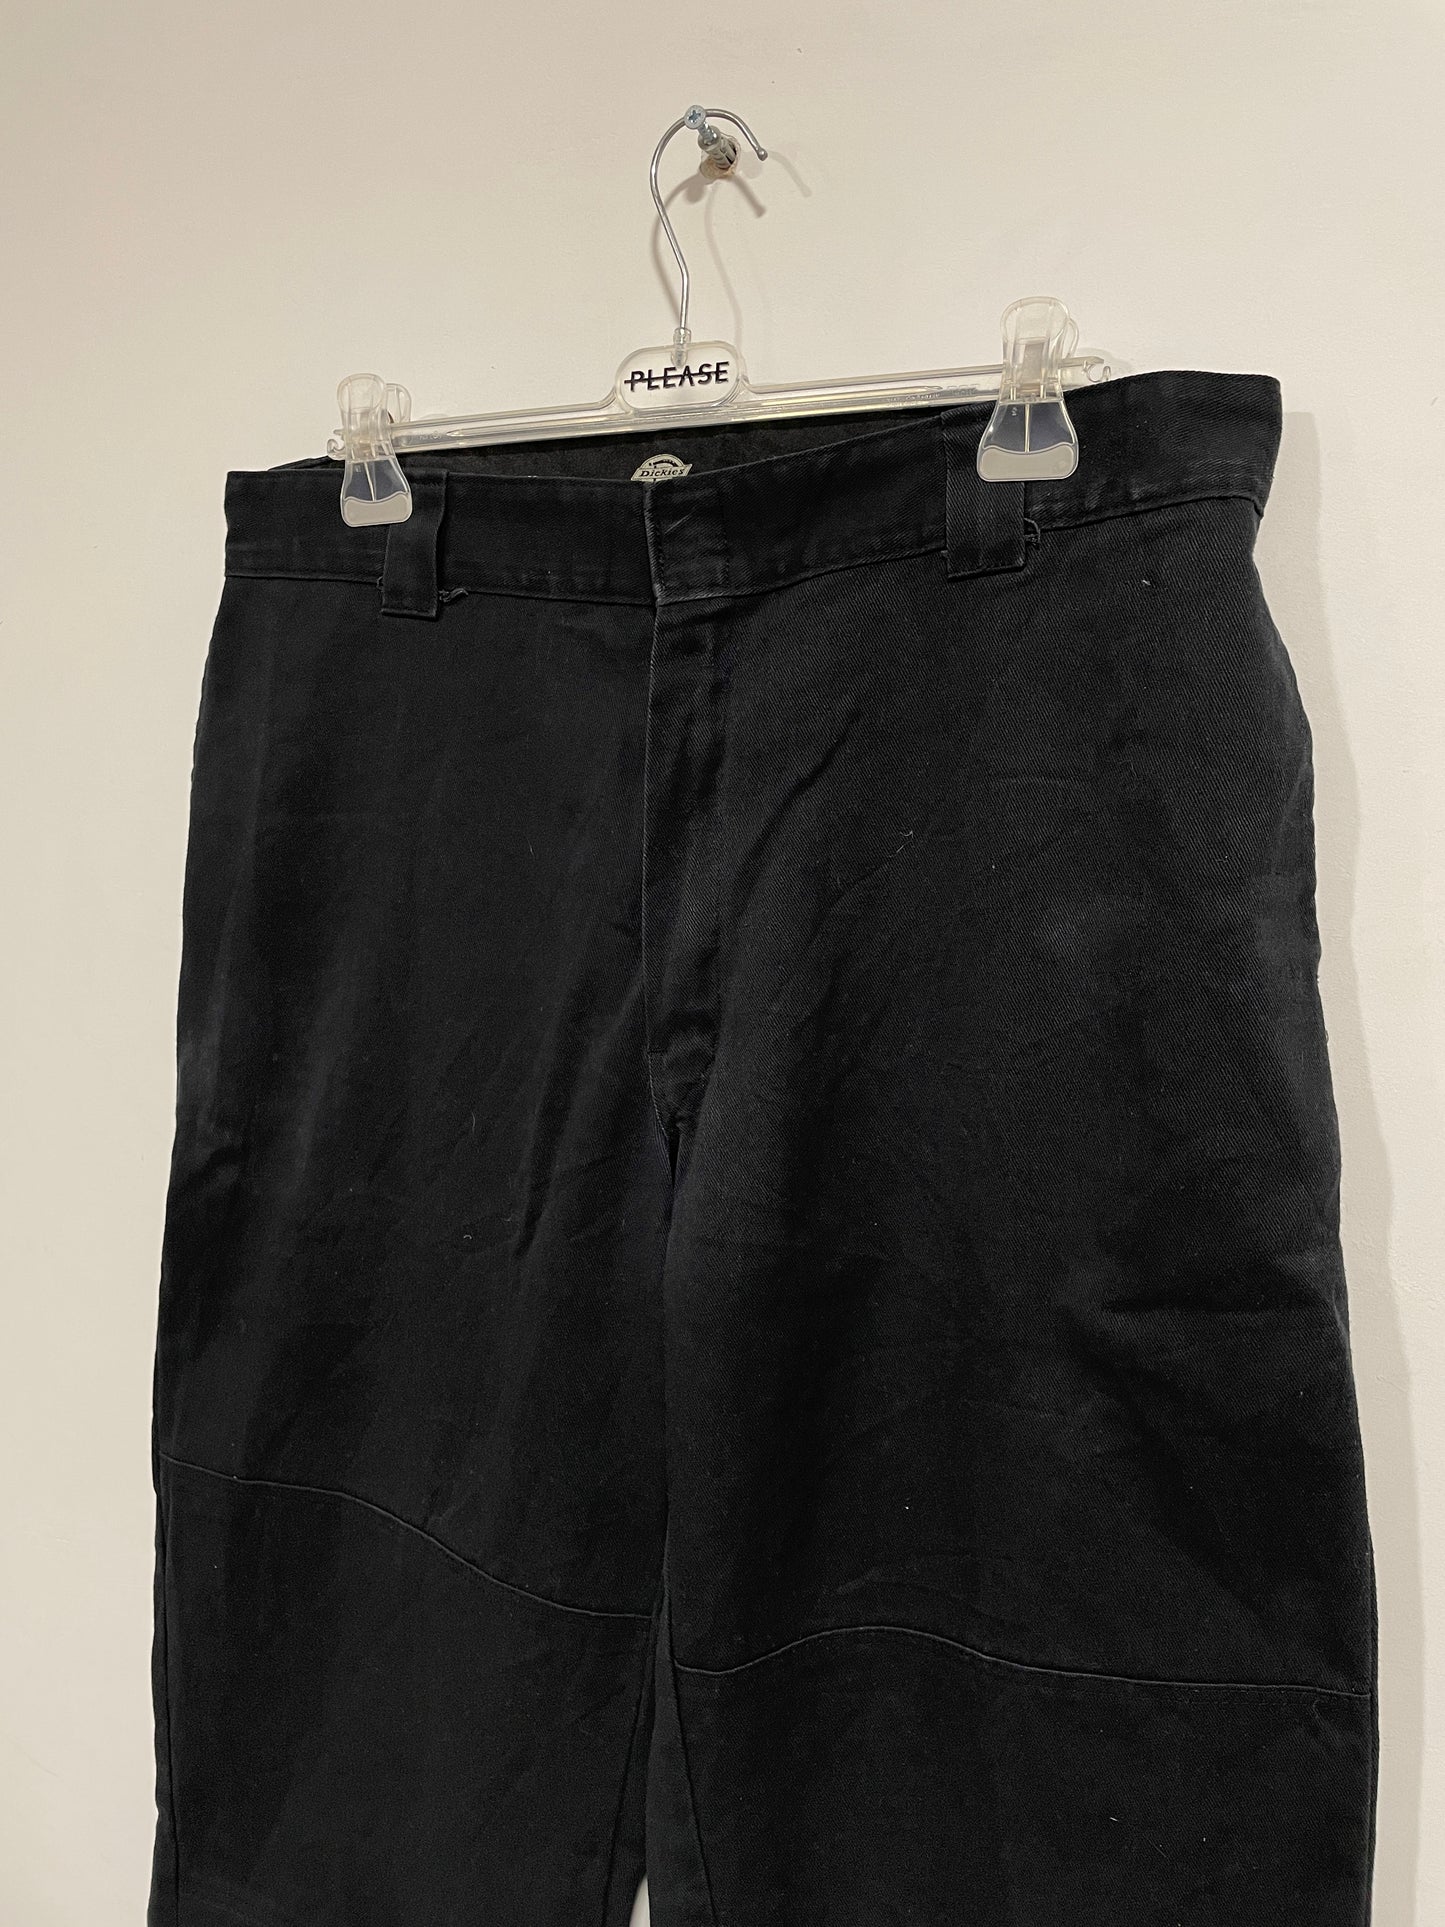 Dickies double Knee Pant (A620)